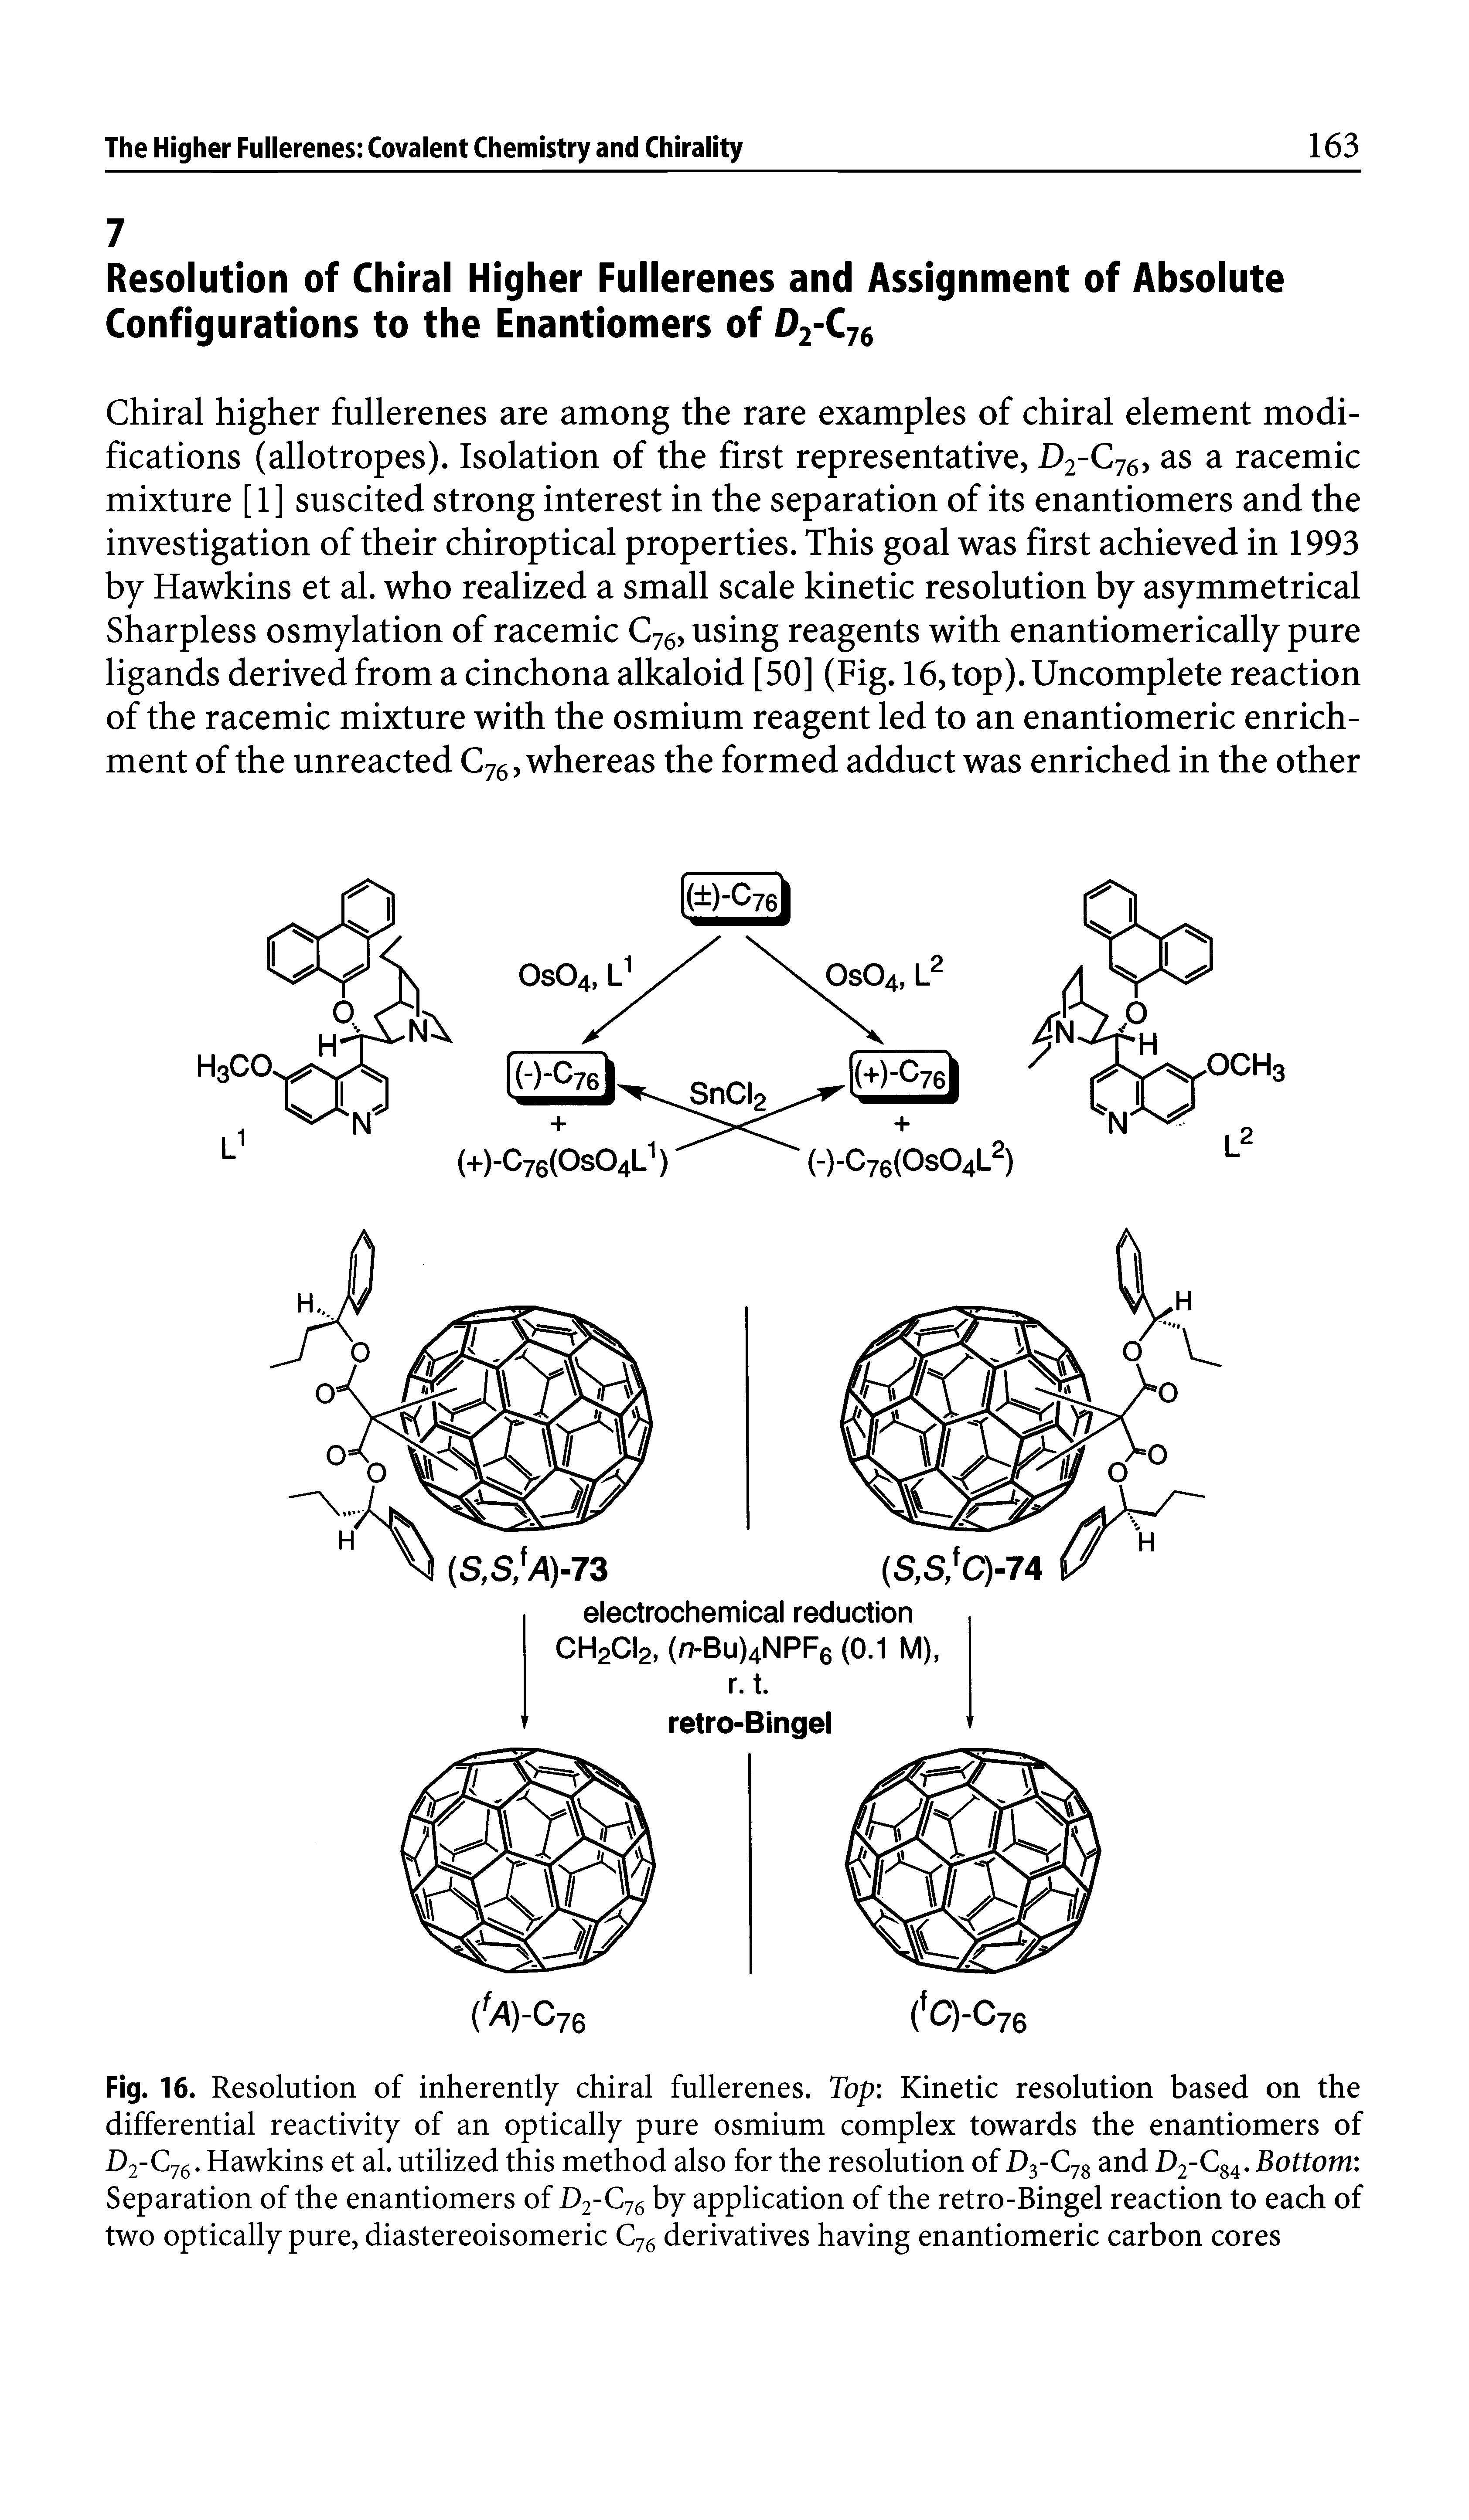 Fig. 16. Resolution of inherently chiral fullerenes. Top Kinetic resolution based on the differential reactivity of an optically pure osmium complex towards the enantiomers of 1 2" C76. Hawkins et al. utilized this method also for the resolution of and D2 C 4, Bottom Separation of the enantiomers of H2-C76 by application of the retro-Bingel reaction to each of two optically pure, diastereoisomeric Cyg derivatives having enantiomeric carbon cores...